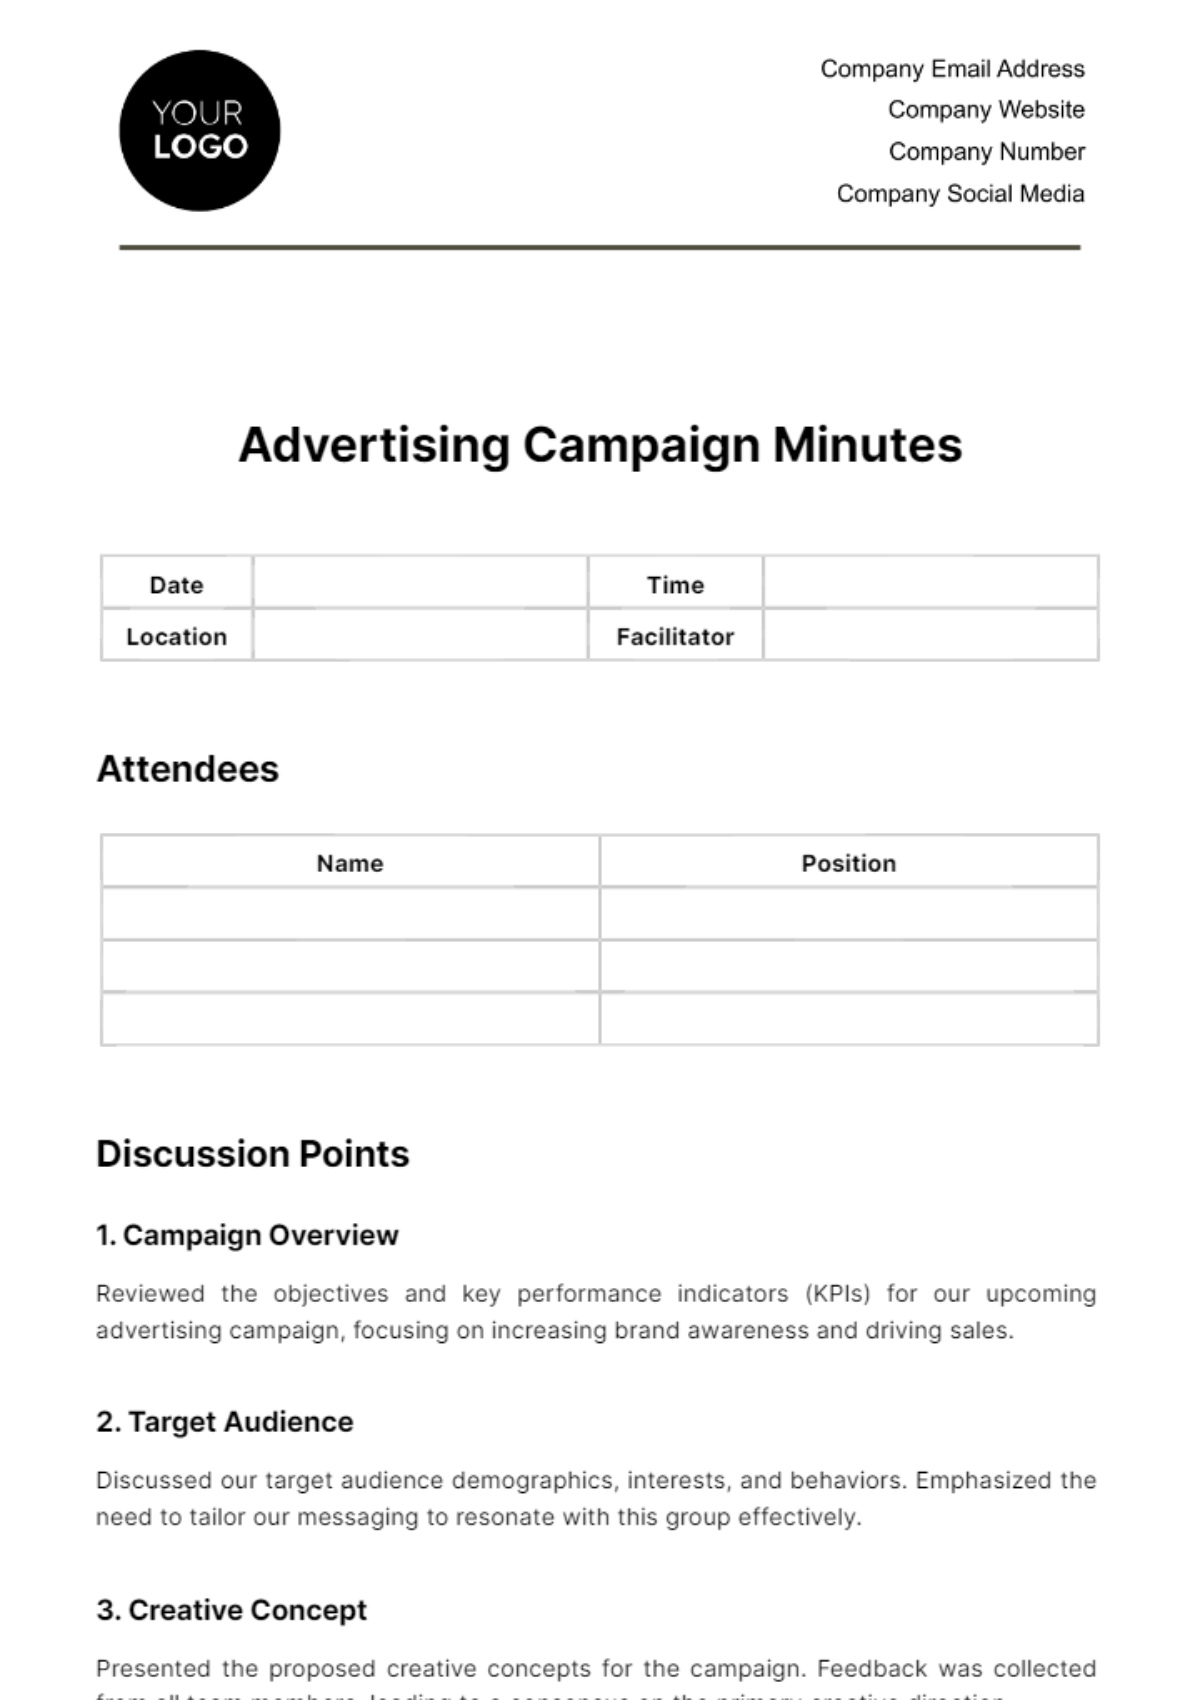 Free Advertising Campaign Minutes Template